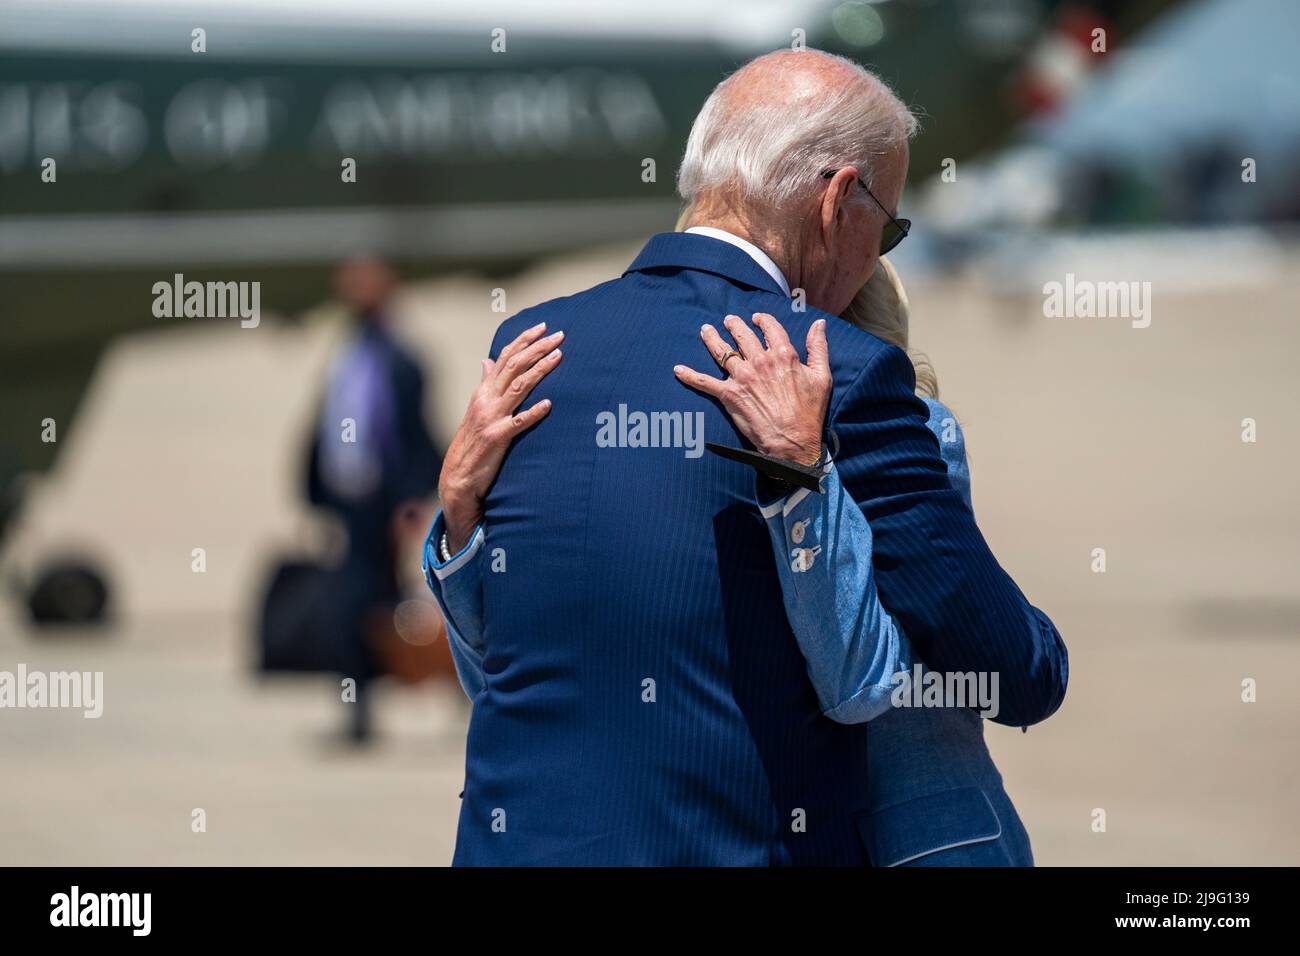 US President Joe Biden and First Lady Jill Biden embrace before she boards her plane at Joint Base Andrews in Maryland, USA 18 May 2022. The First Lady is departing on a trip to Ecuador. Credit: Shawn Thew/Pool via CNP Stock Photo